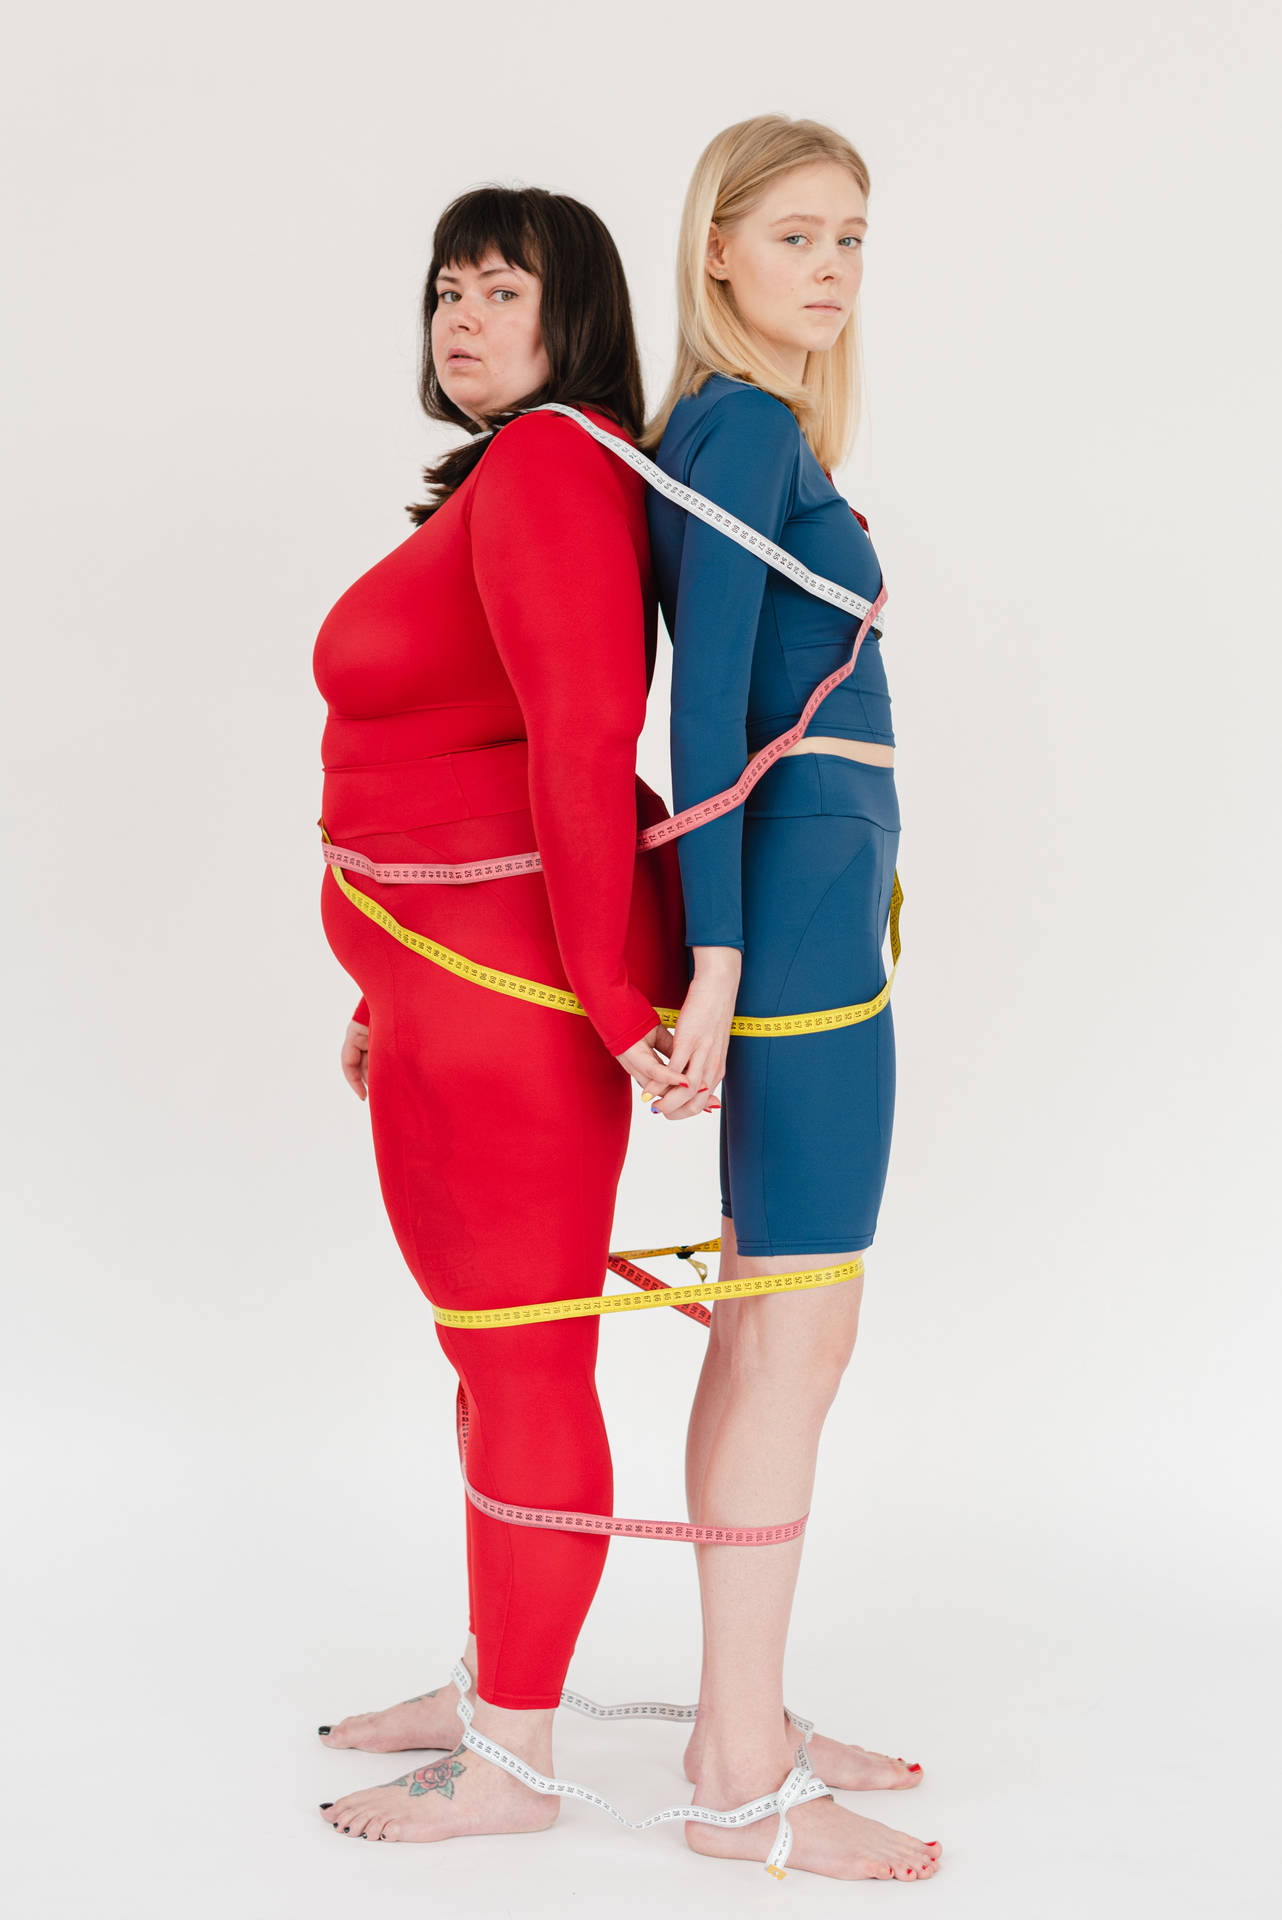 Fat Woman Tied To Thin Woman Wallpaper